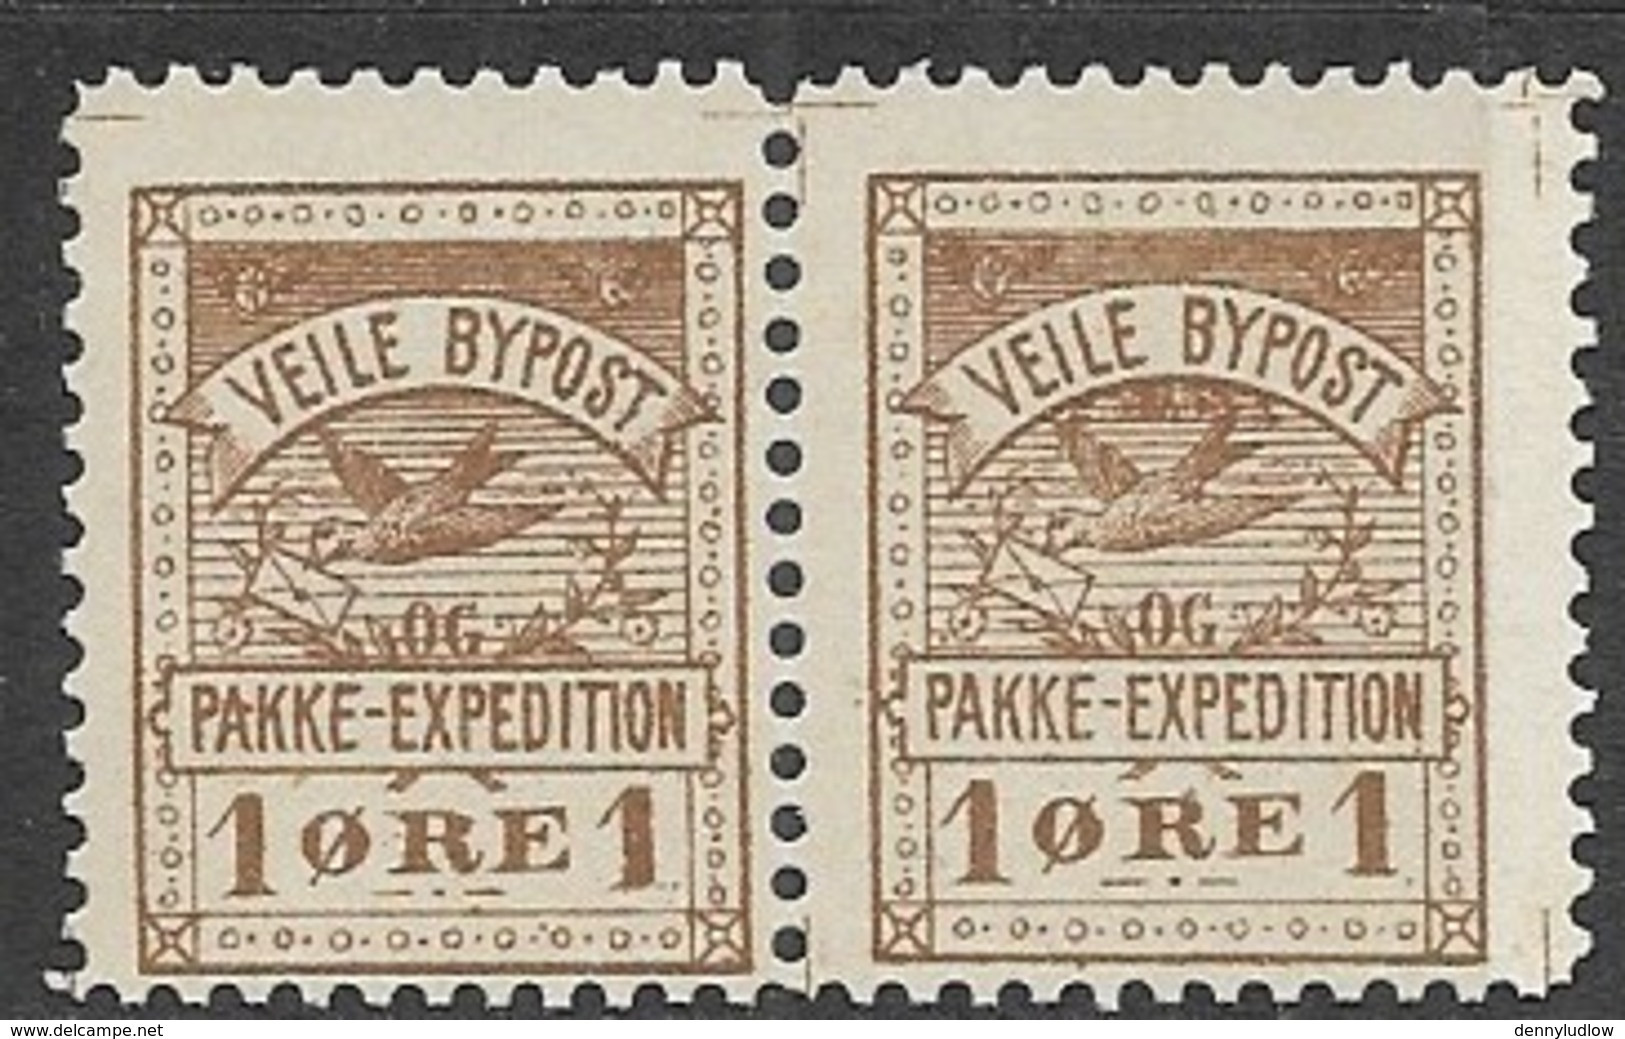 Denmark  1880s  1o  Veile Bypost  Pakke Exposition Pair No Gum - Local Post Stamps